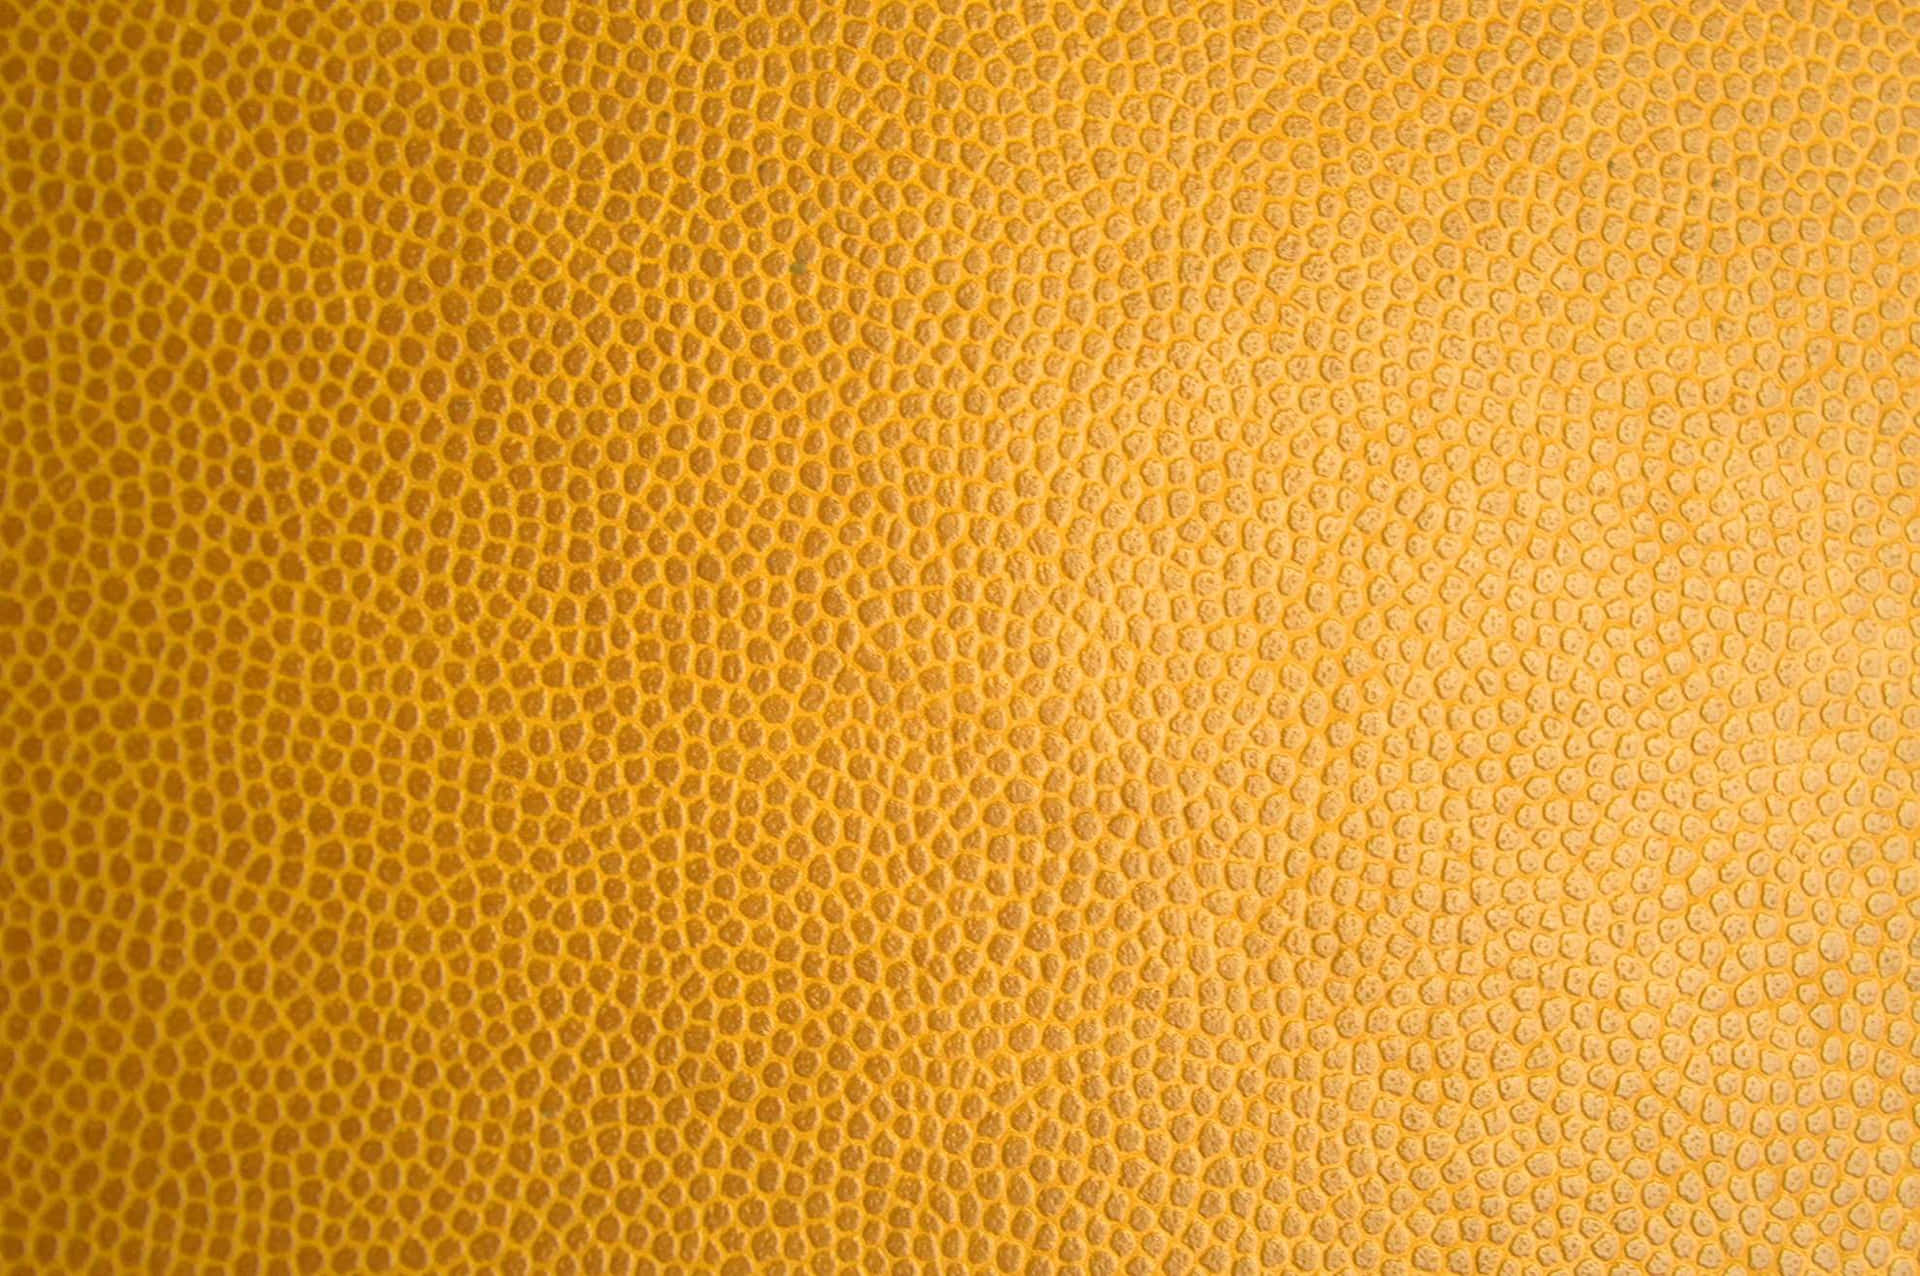 A Close Up Of A Yellow Leather Texture